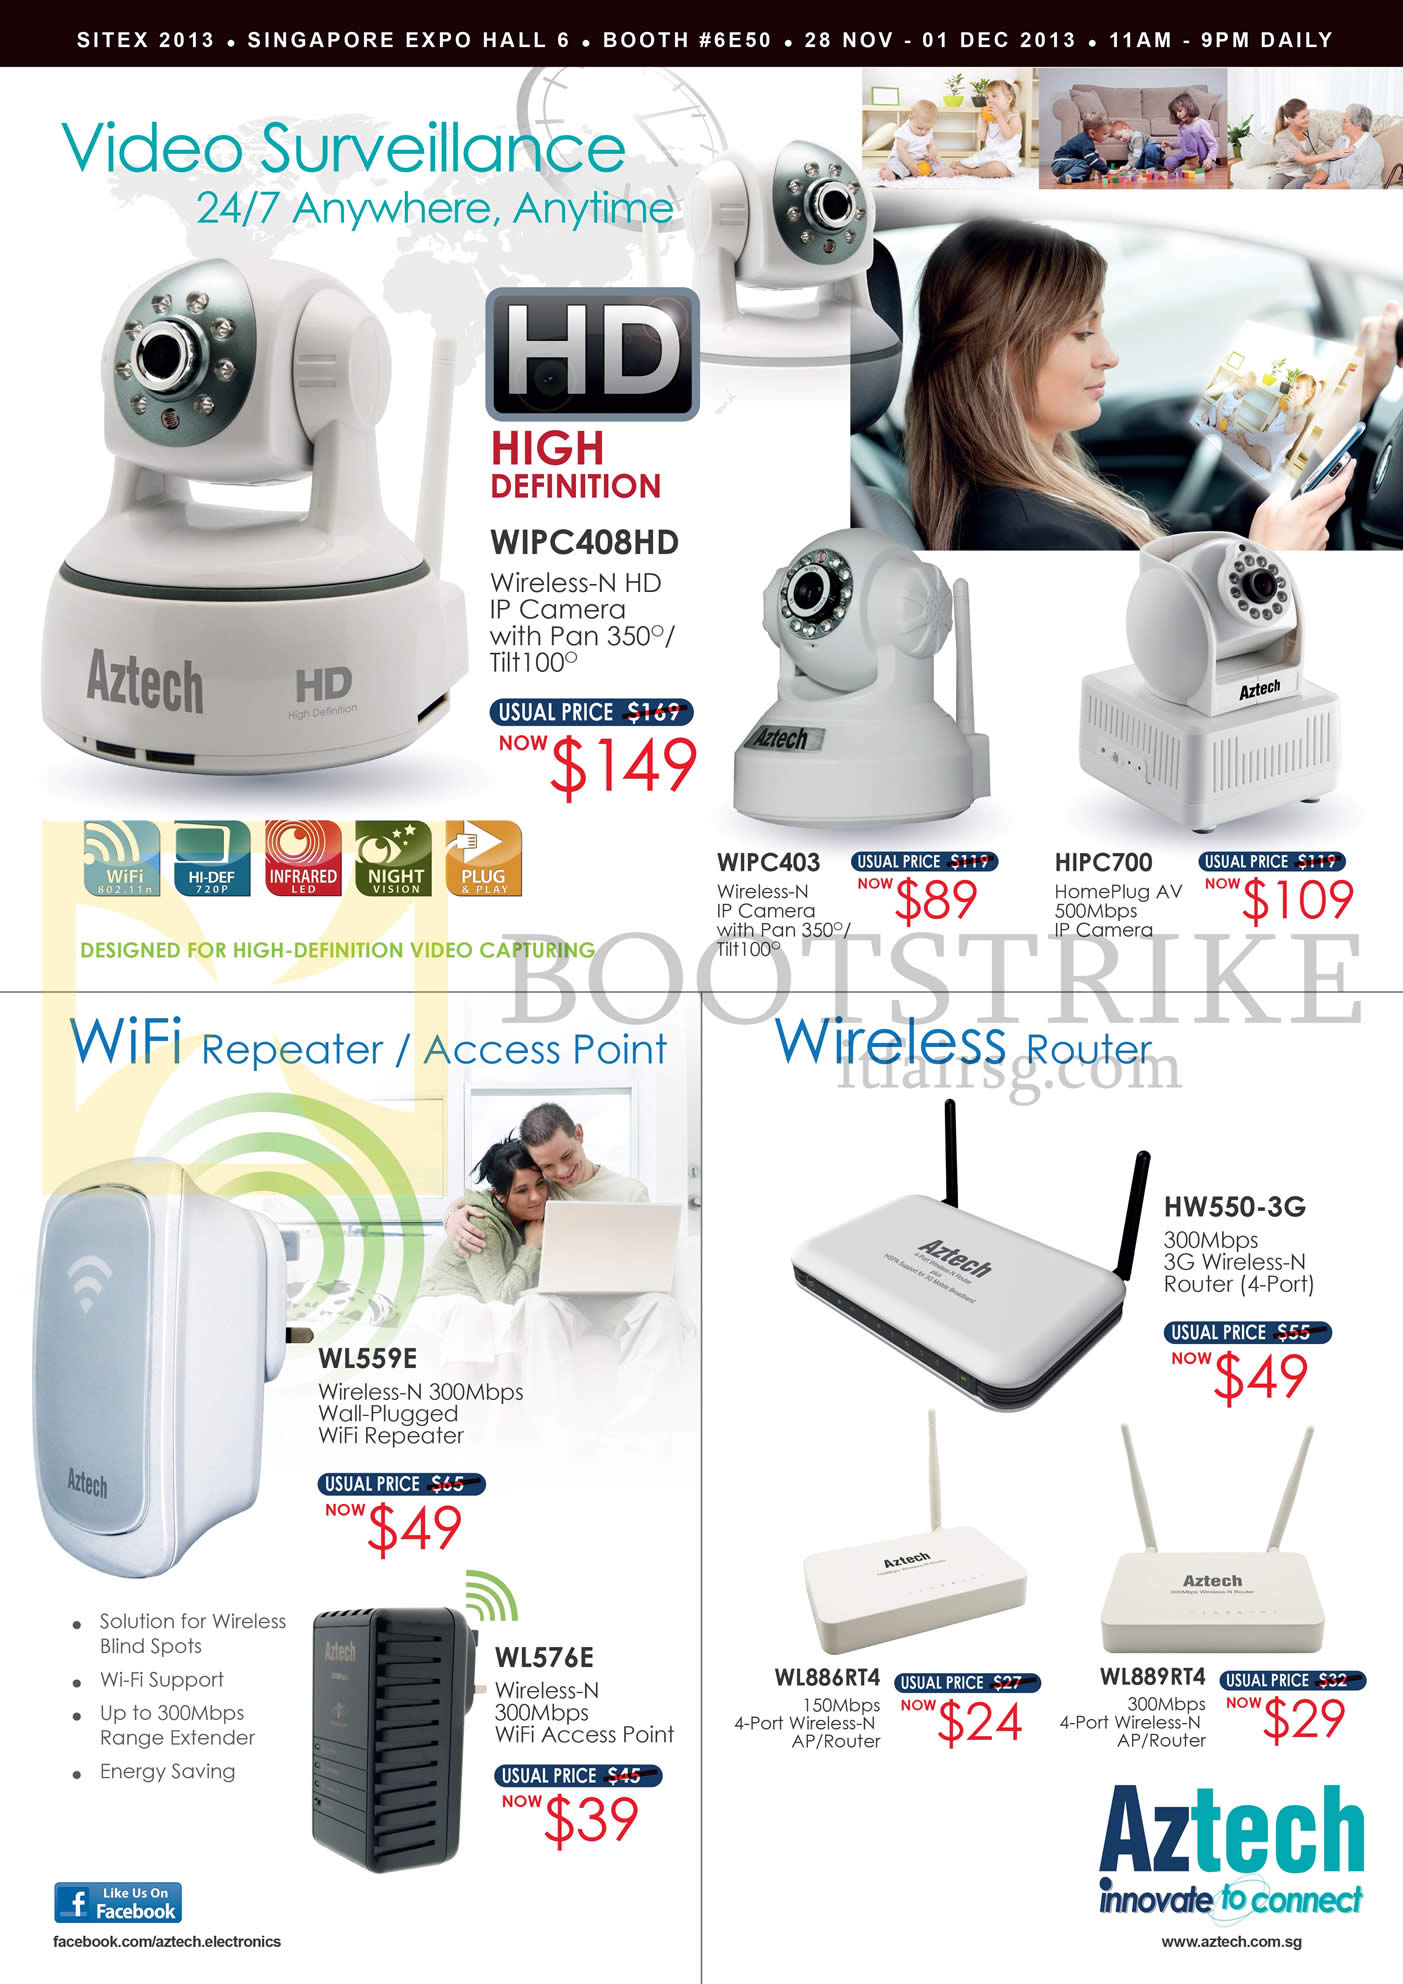 SITEX 2013 price list image brochure of Aztech Video Surveillance WIPC408HD, Wireless Repeater WL559E, Routers